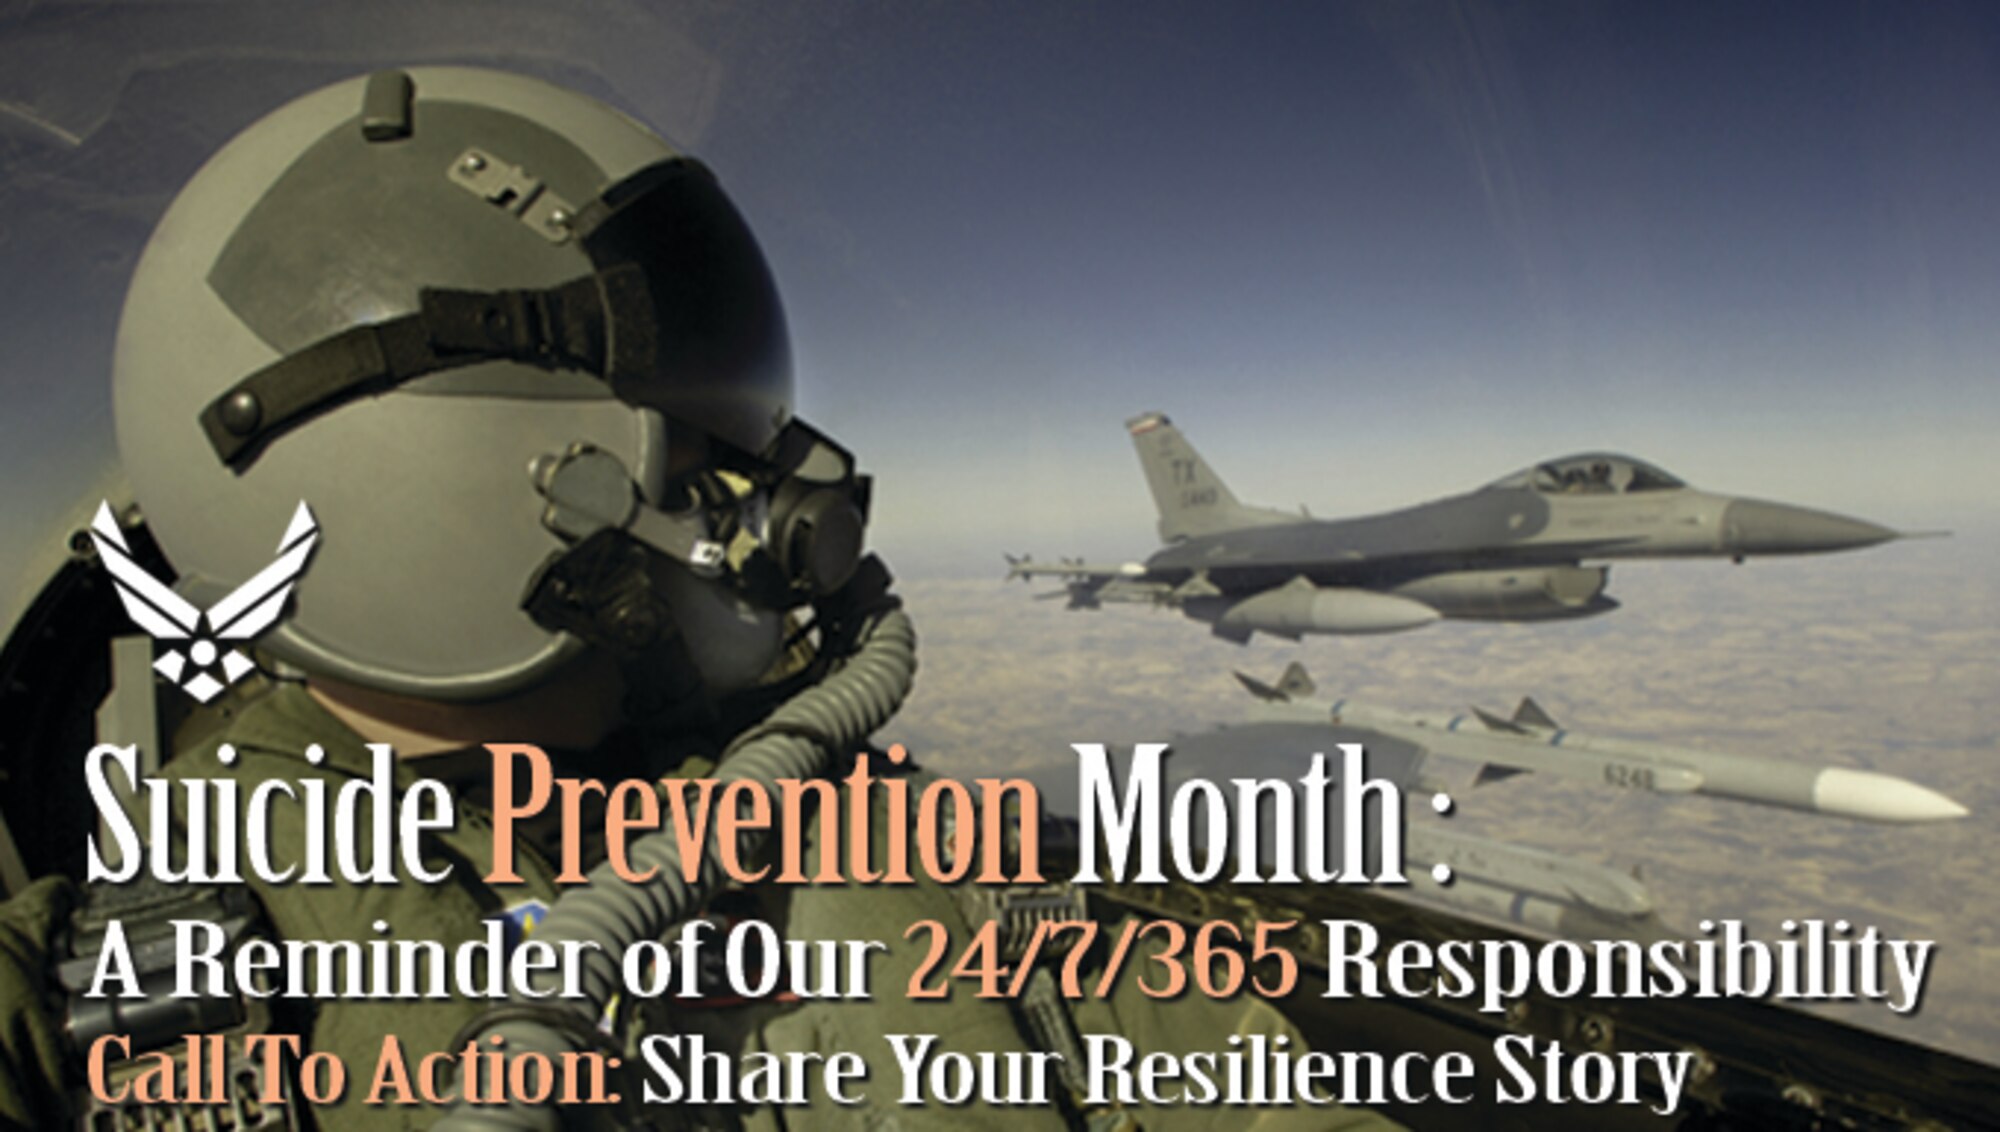 Suicide Prevention Month: A reminder of our 24/7/365 responsibility to ourselves and each other (Air Force Graphic / Steve Thompson)